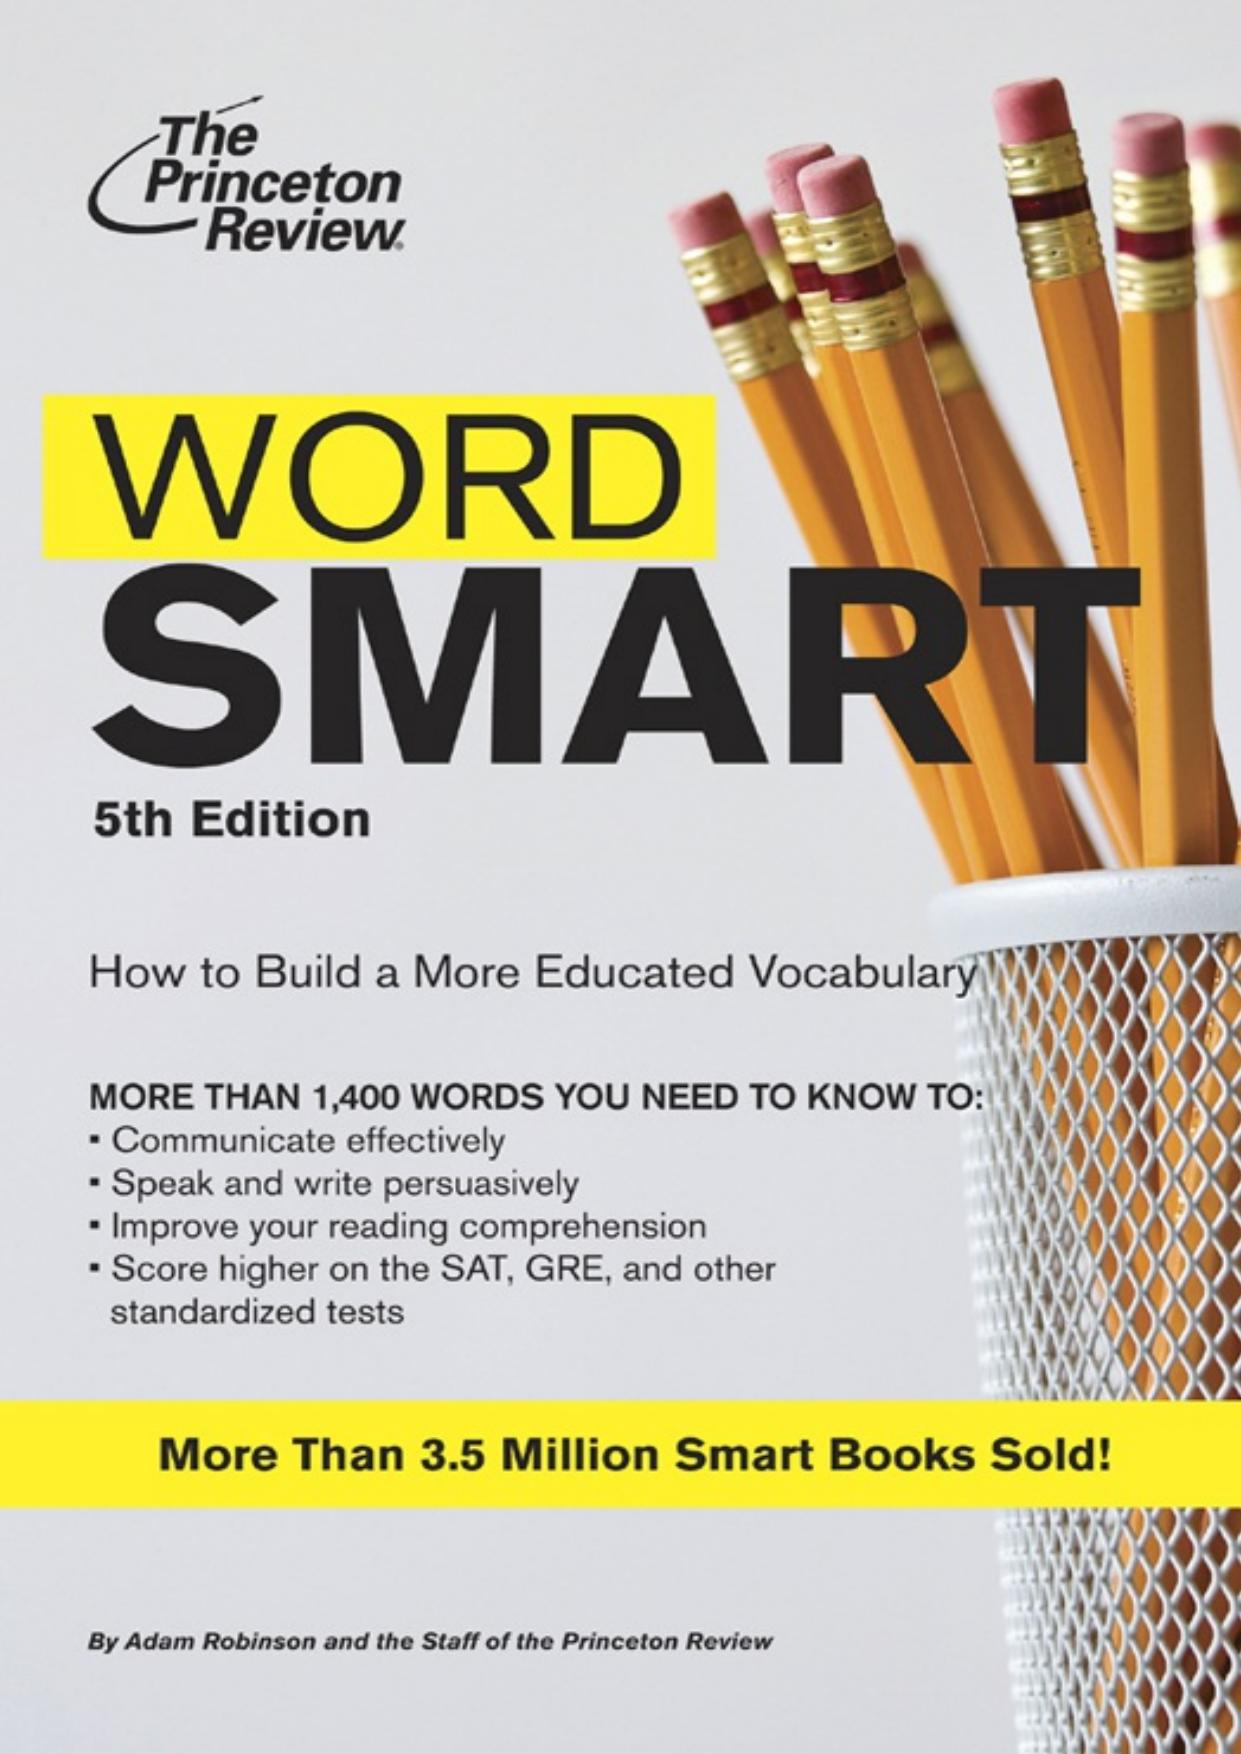 Word Smart, 5th Edition